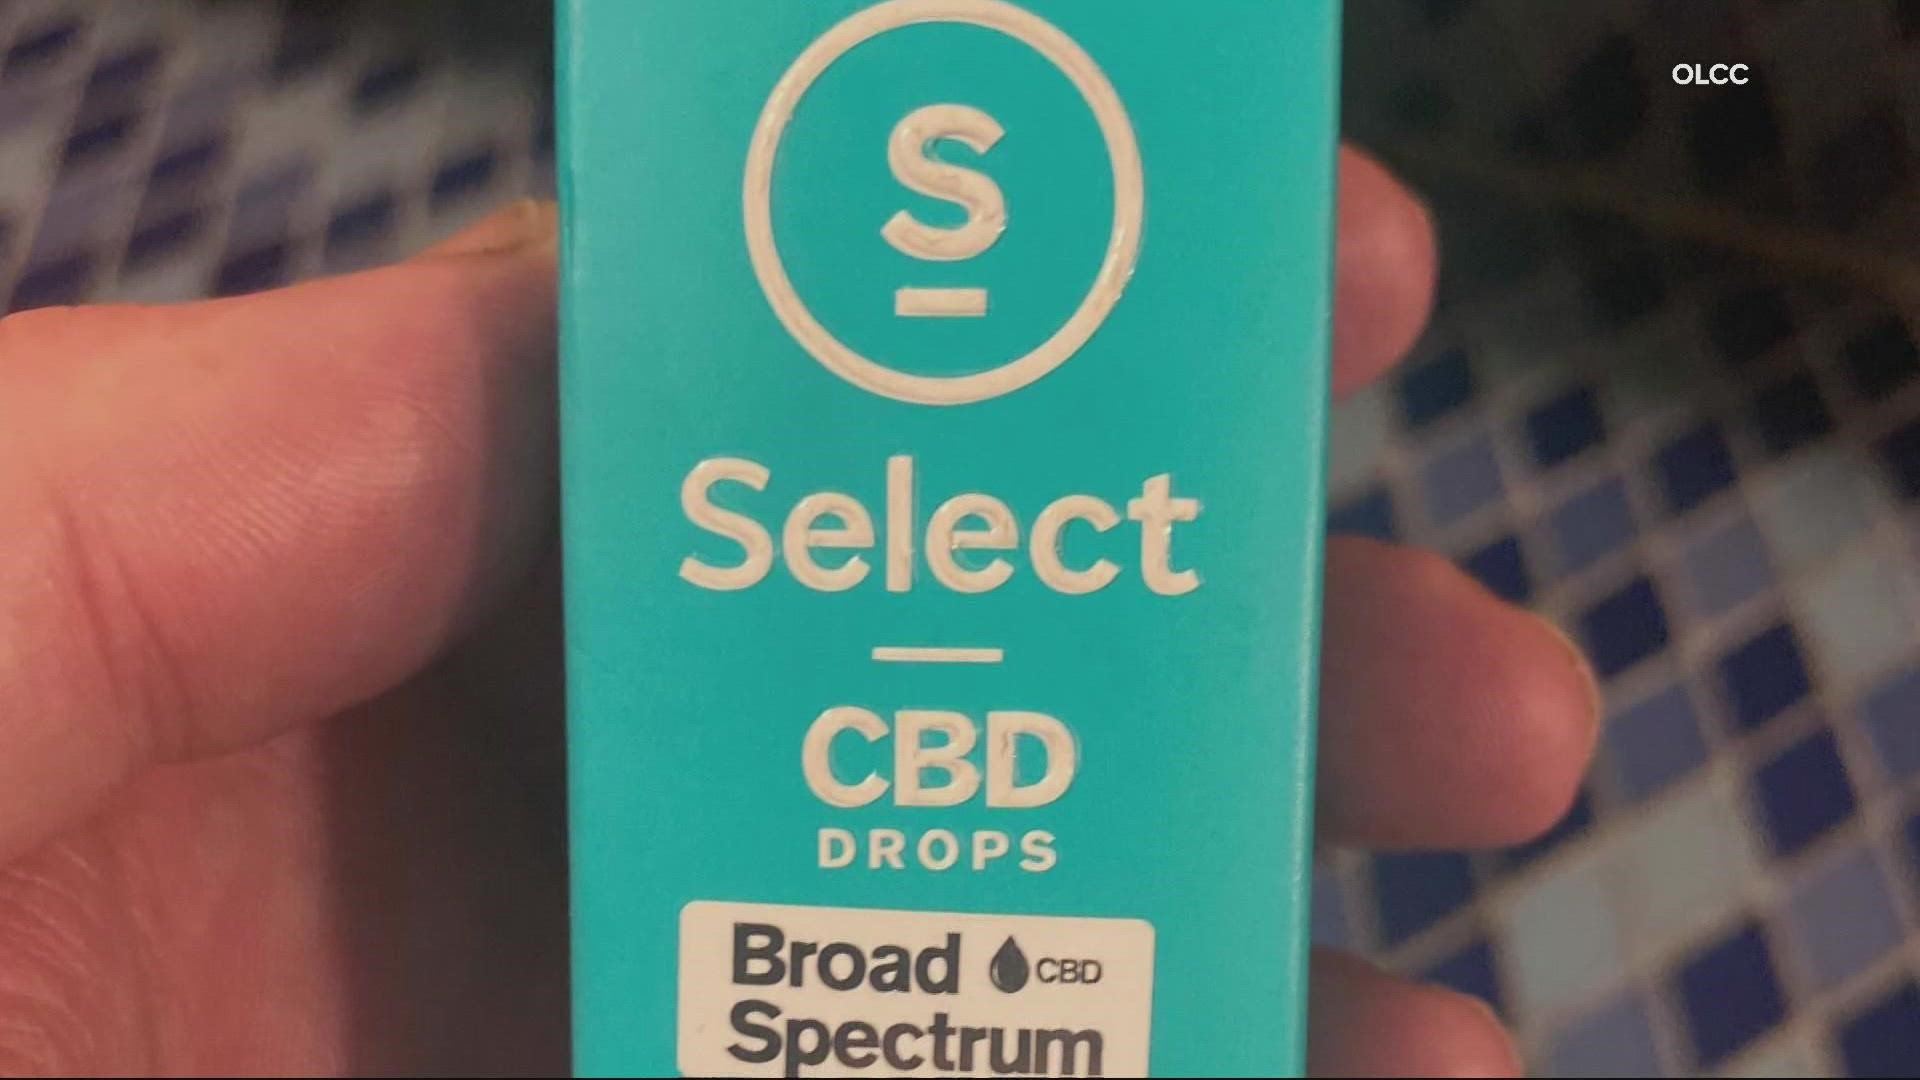 An Idaho man bought CBD drops that contained THC, the active ingredient in marijuana. Jason Crawforth said he ended up going to the emergency room.